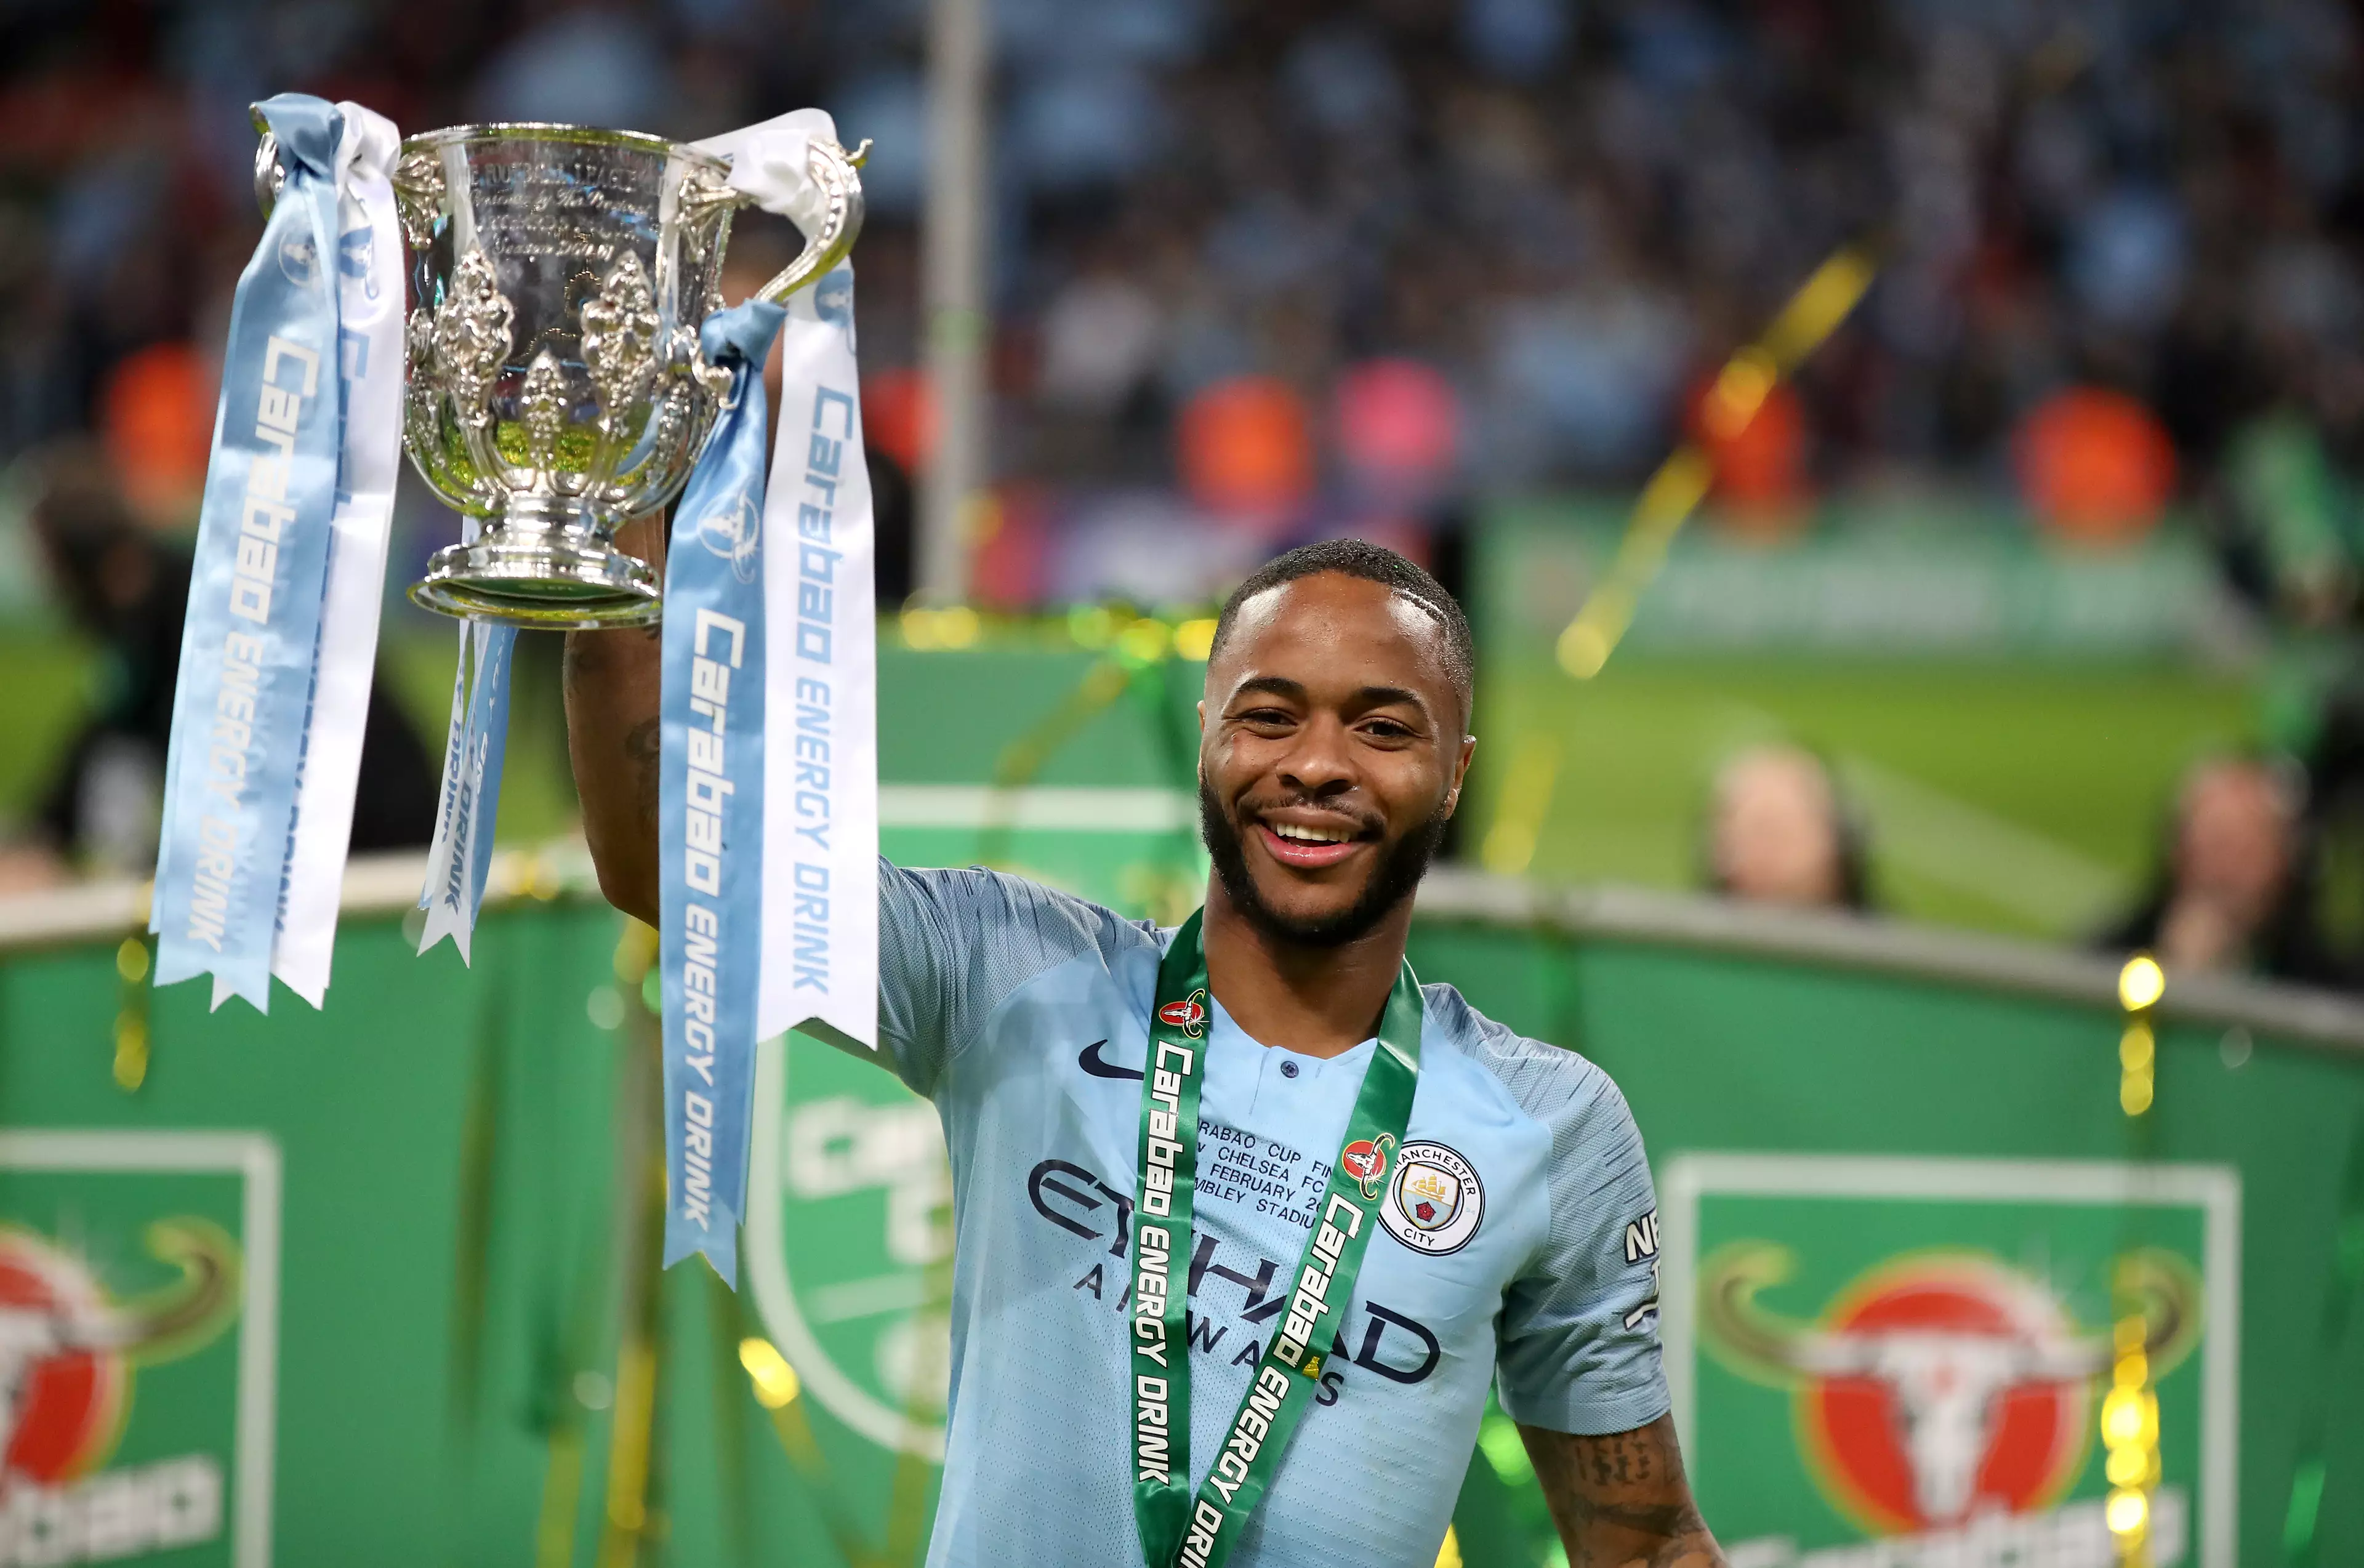 Raheem Sterling lifts the Carabao Cup after victory over Chelsea in the final